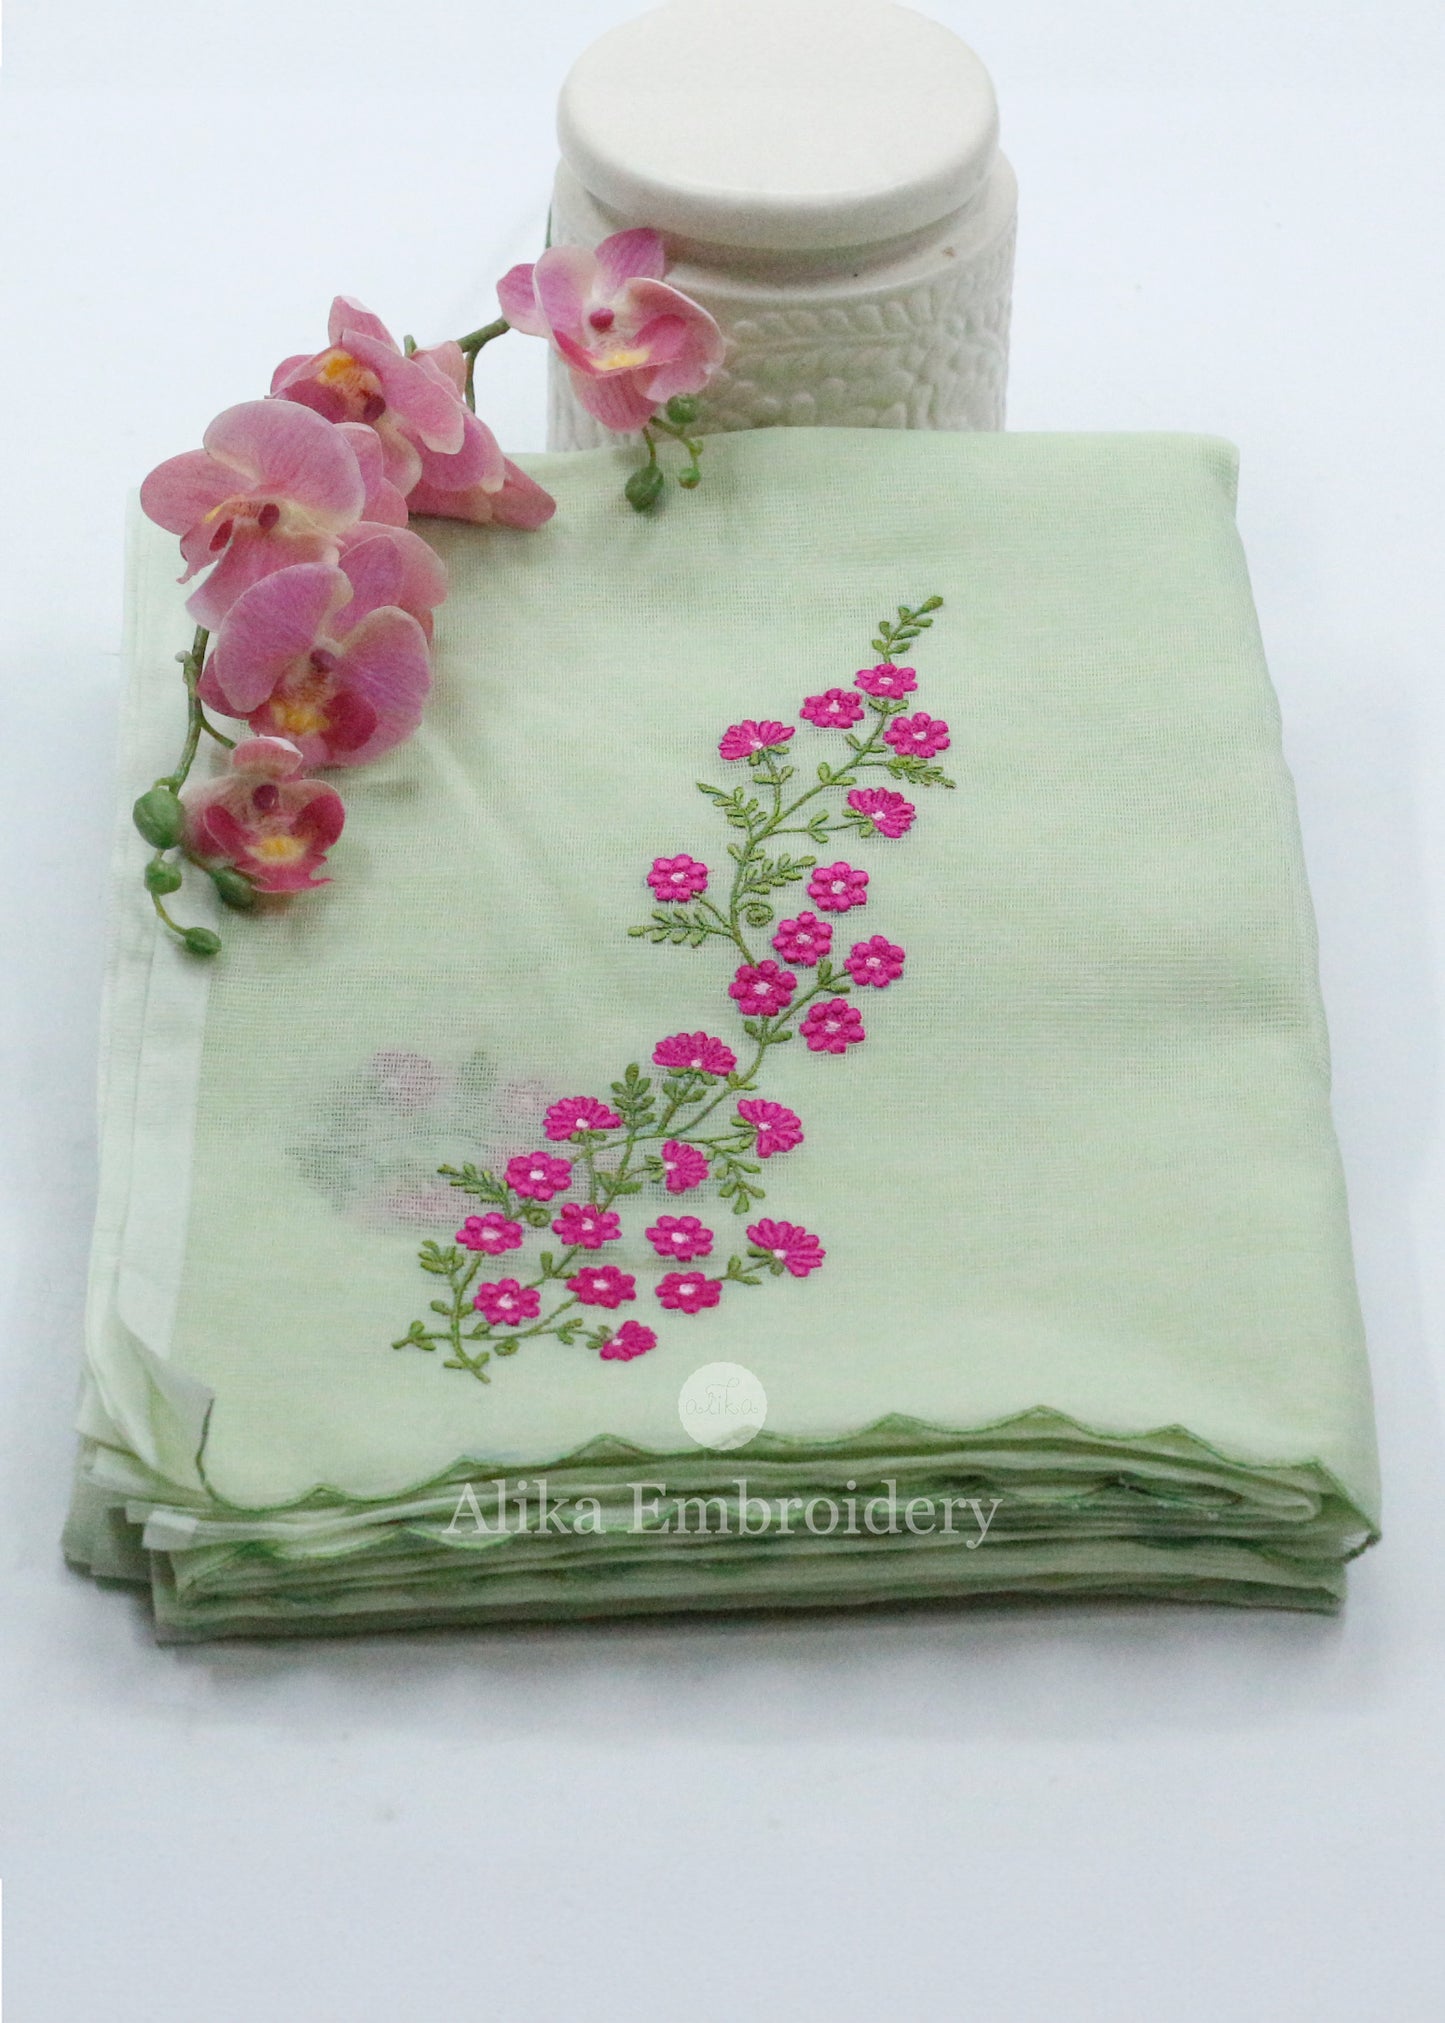 Pistachio Perfection: Silky Kota Saree in Pista Green with Rani Pink Machine Embroidery